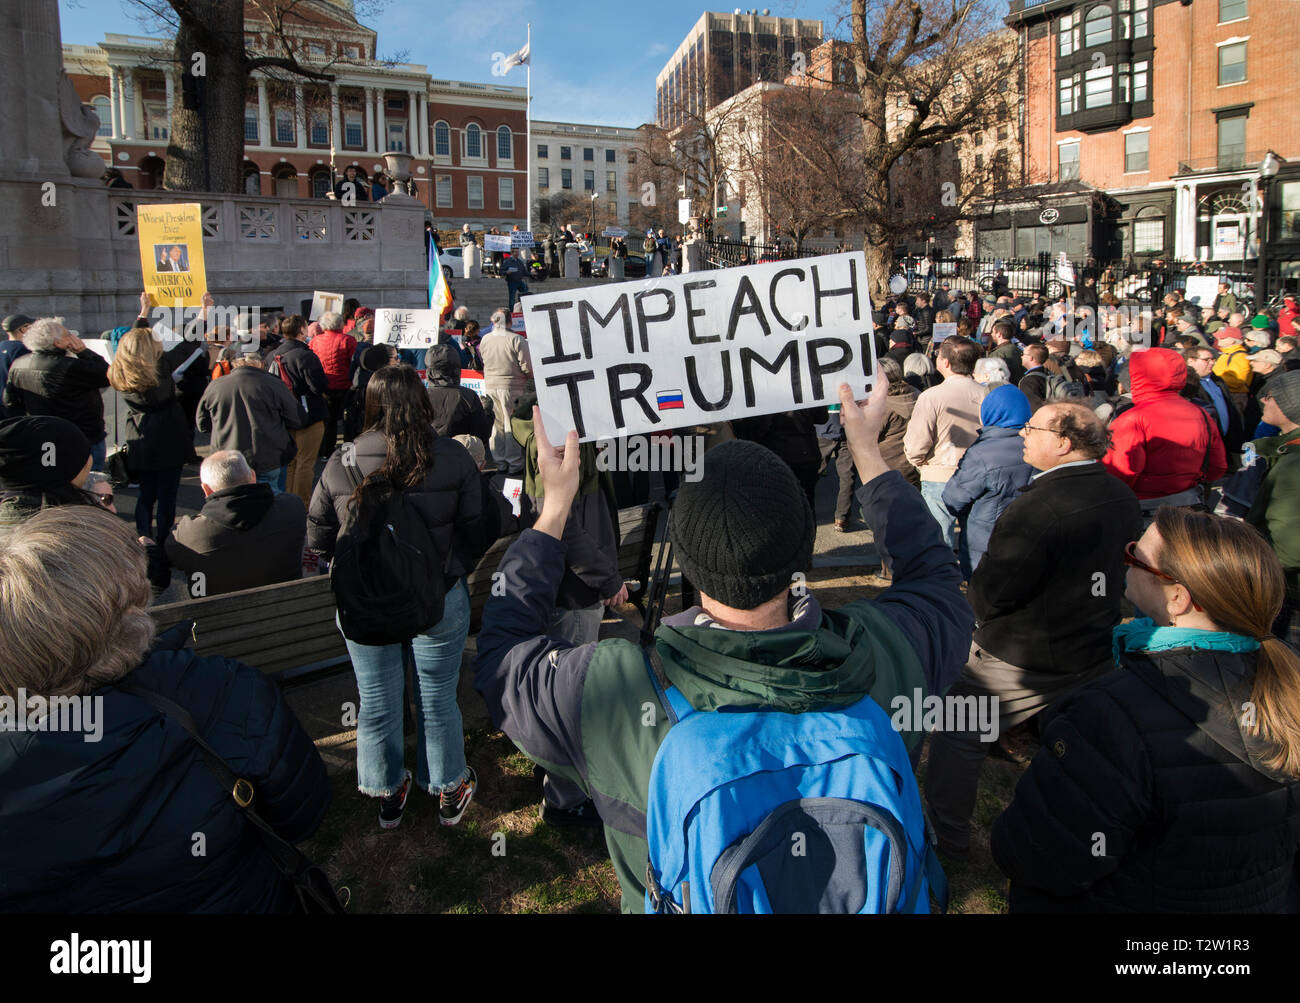 Boston, MA, USA April 4th 2019.  Over 500 demonstrators gathered on the Boston Common, across the street from the Massachusetts State House in central Boston to demand the release of the Mueller investigation into Current U.S. President Donald Trump.  Protests demanding the full release of the Mueller investigation into Russian involvement in the 2016 American presidential election and Trump's alleged obstruction of justice took place in cities across America on April 4th 2019. Credit: Chuck Nacke / Alamy Live News Stock Photo